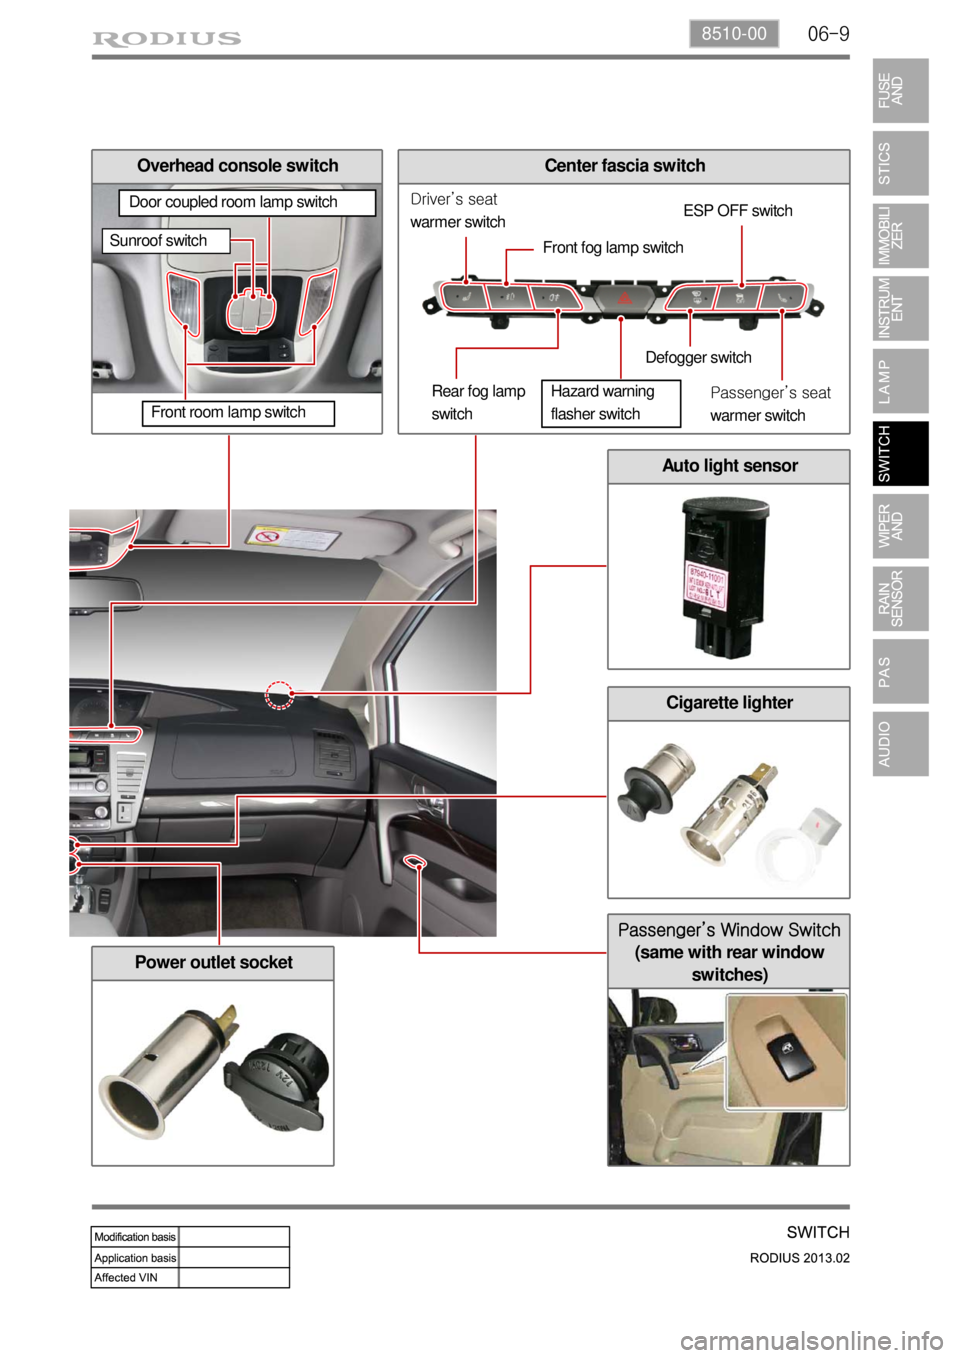 SSANGYONG TURISMO 2013  Service Manual 06-98510-00
Center fascia switch
Passenger’s Window Switch 
(same with rear window 
switches)
Overhead console switch
Auto light sensor
Cigarette lighter
Power outlet socket
Driver’s seat 
warmer 